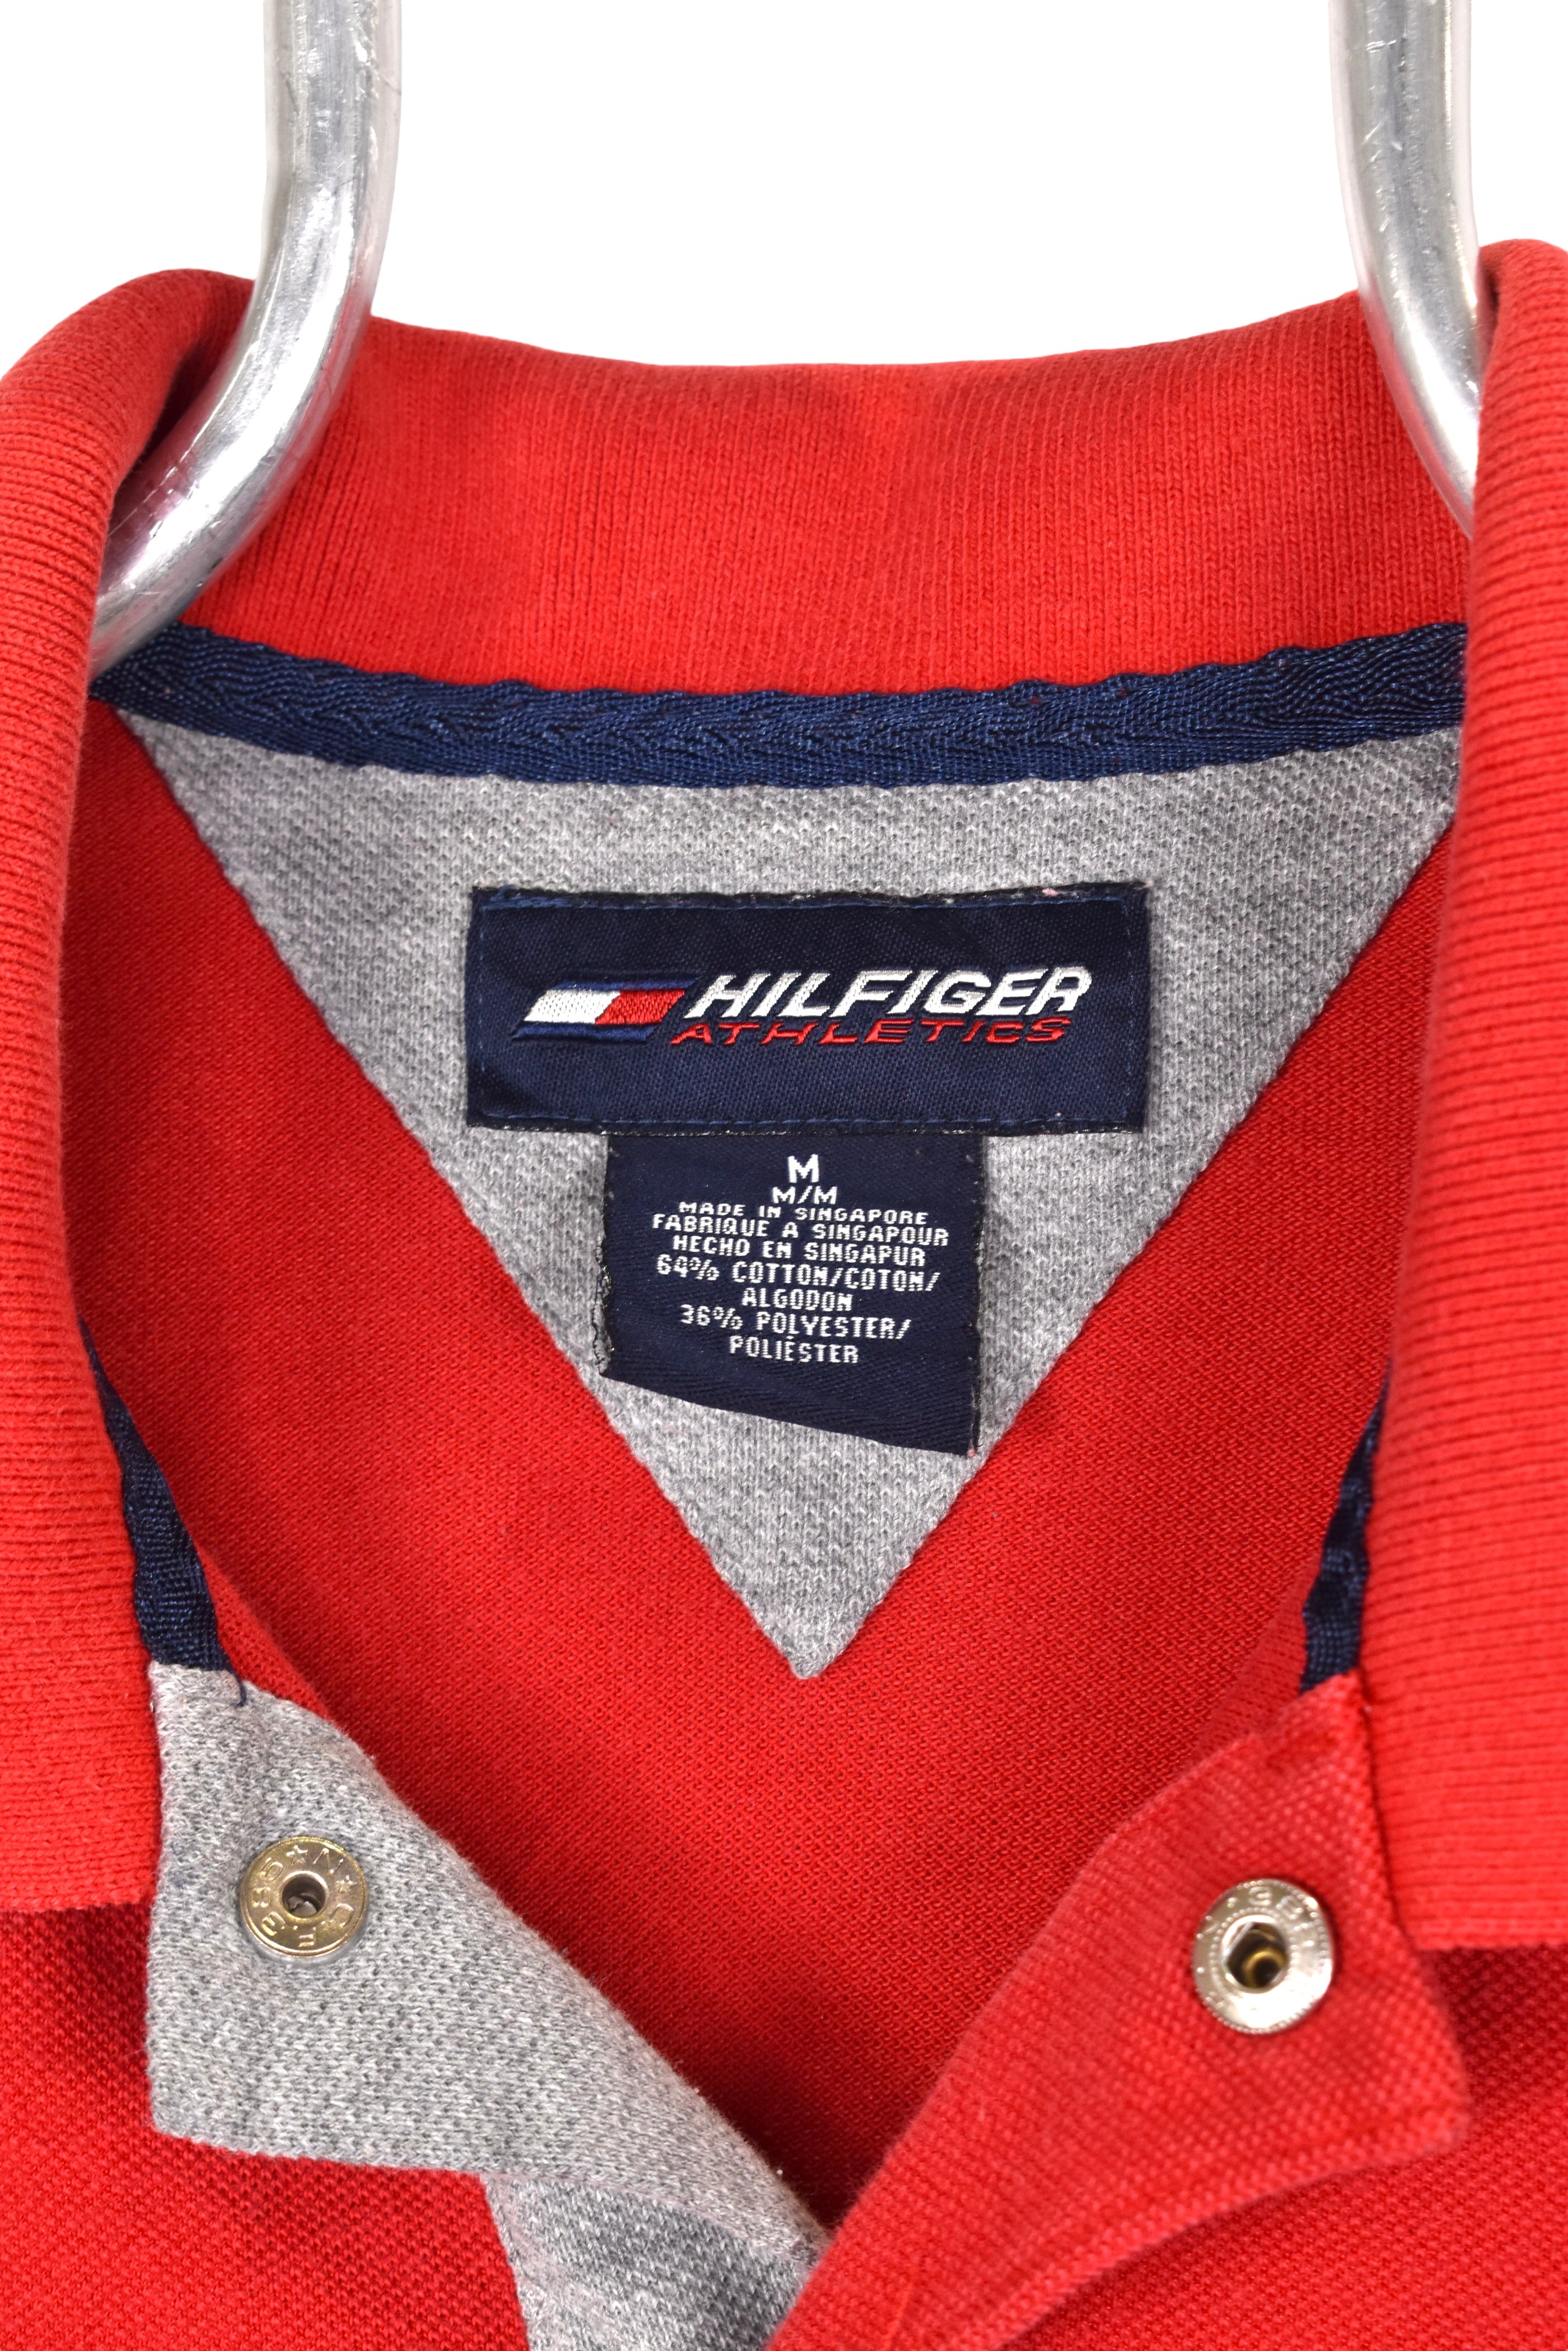 Vintage Tommy Hilfiger polo, red embroidered collared shirt - Medium